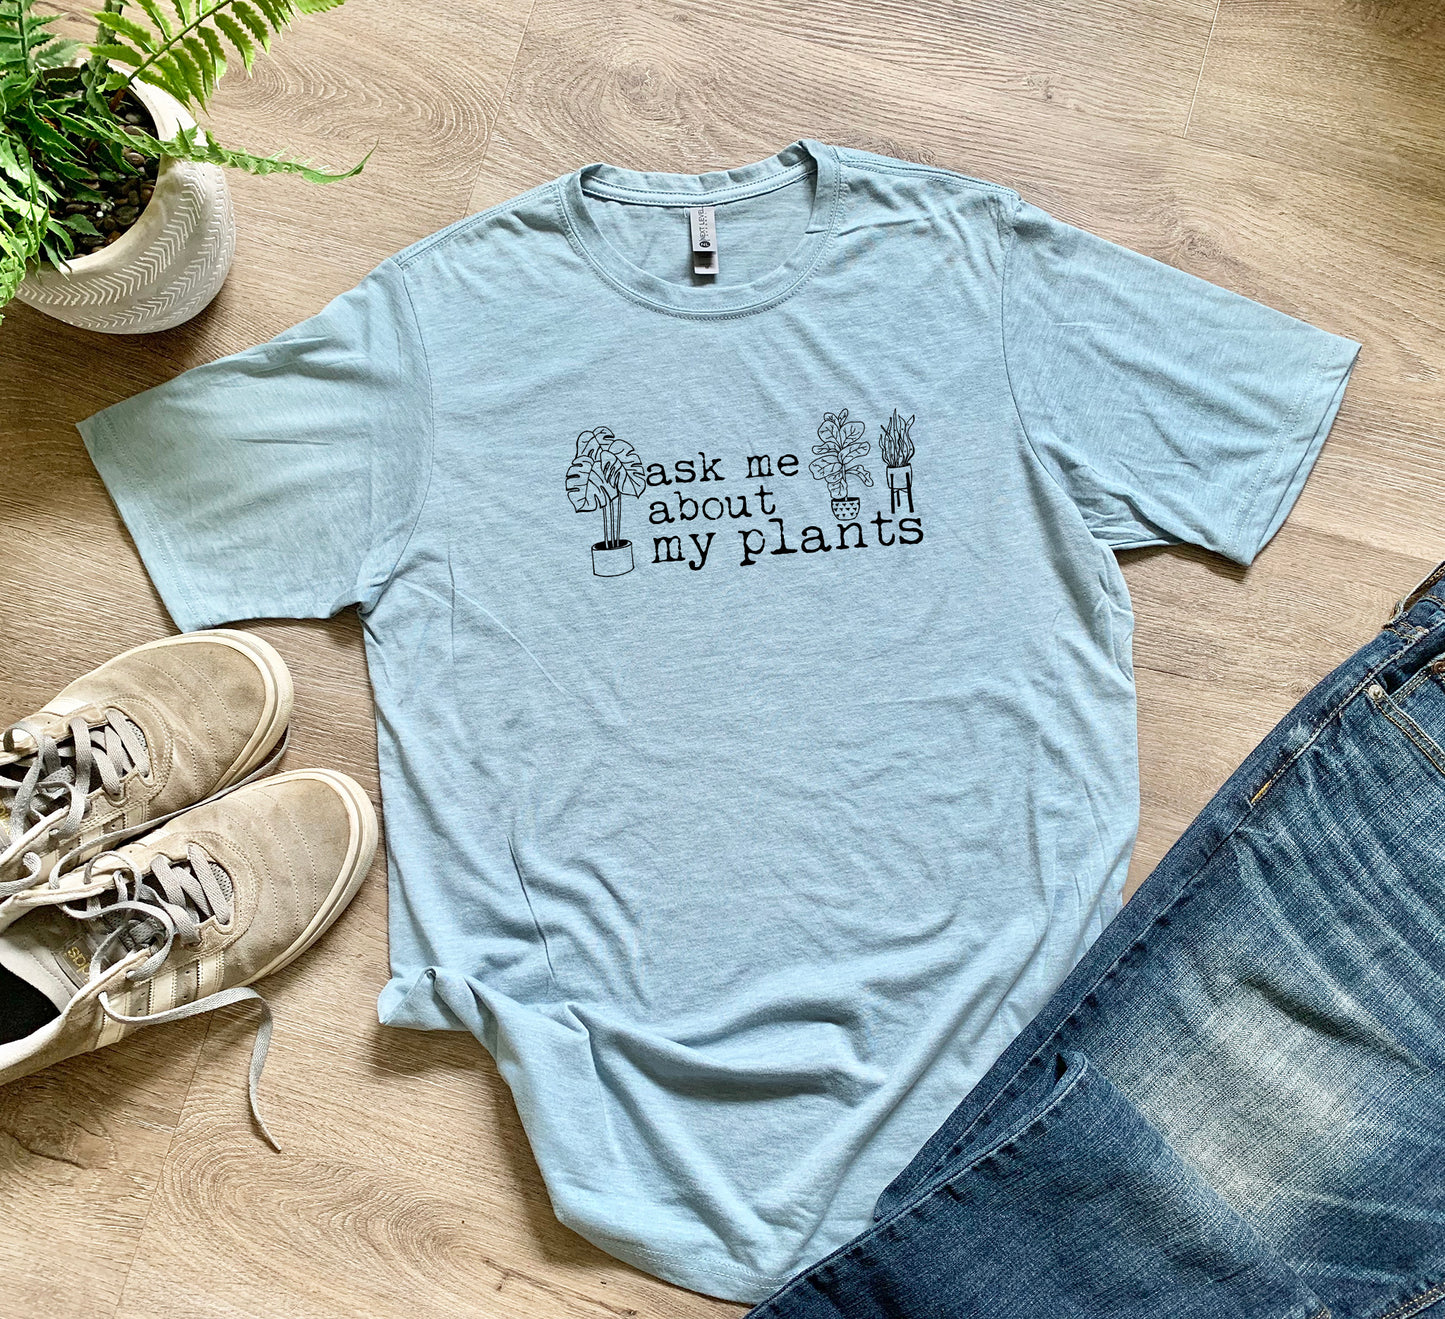 a t - shirt that says, i'm not about my plants on it